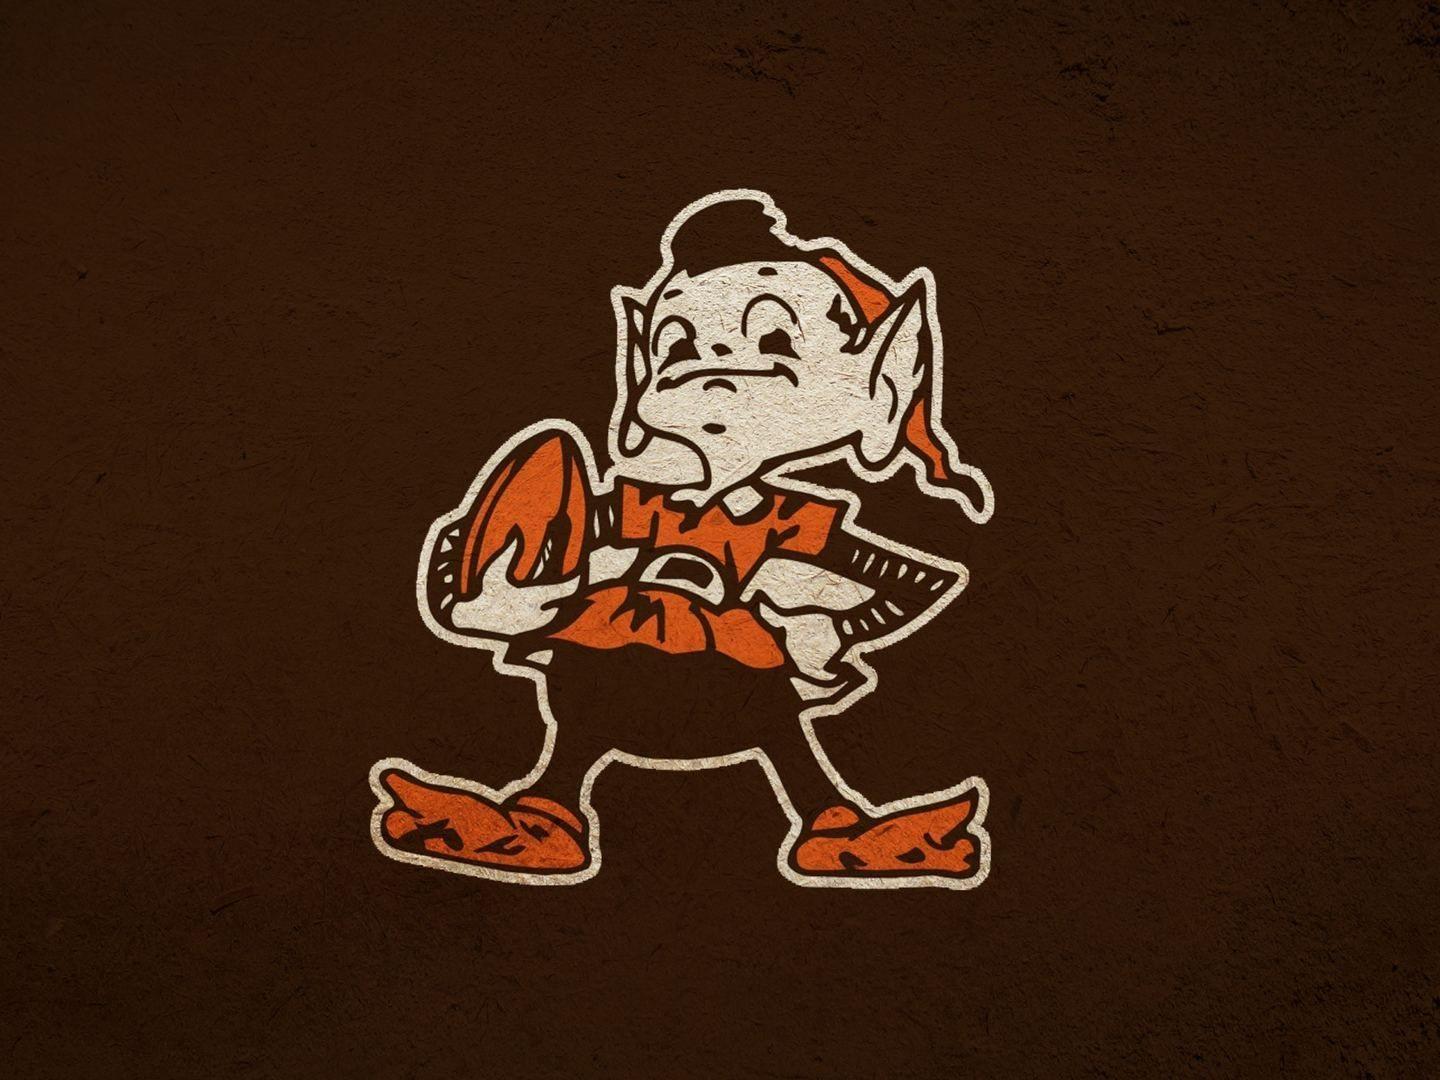 Cleveland Browns wallpaper HD free download